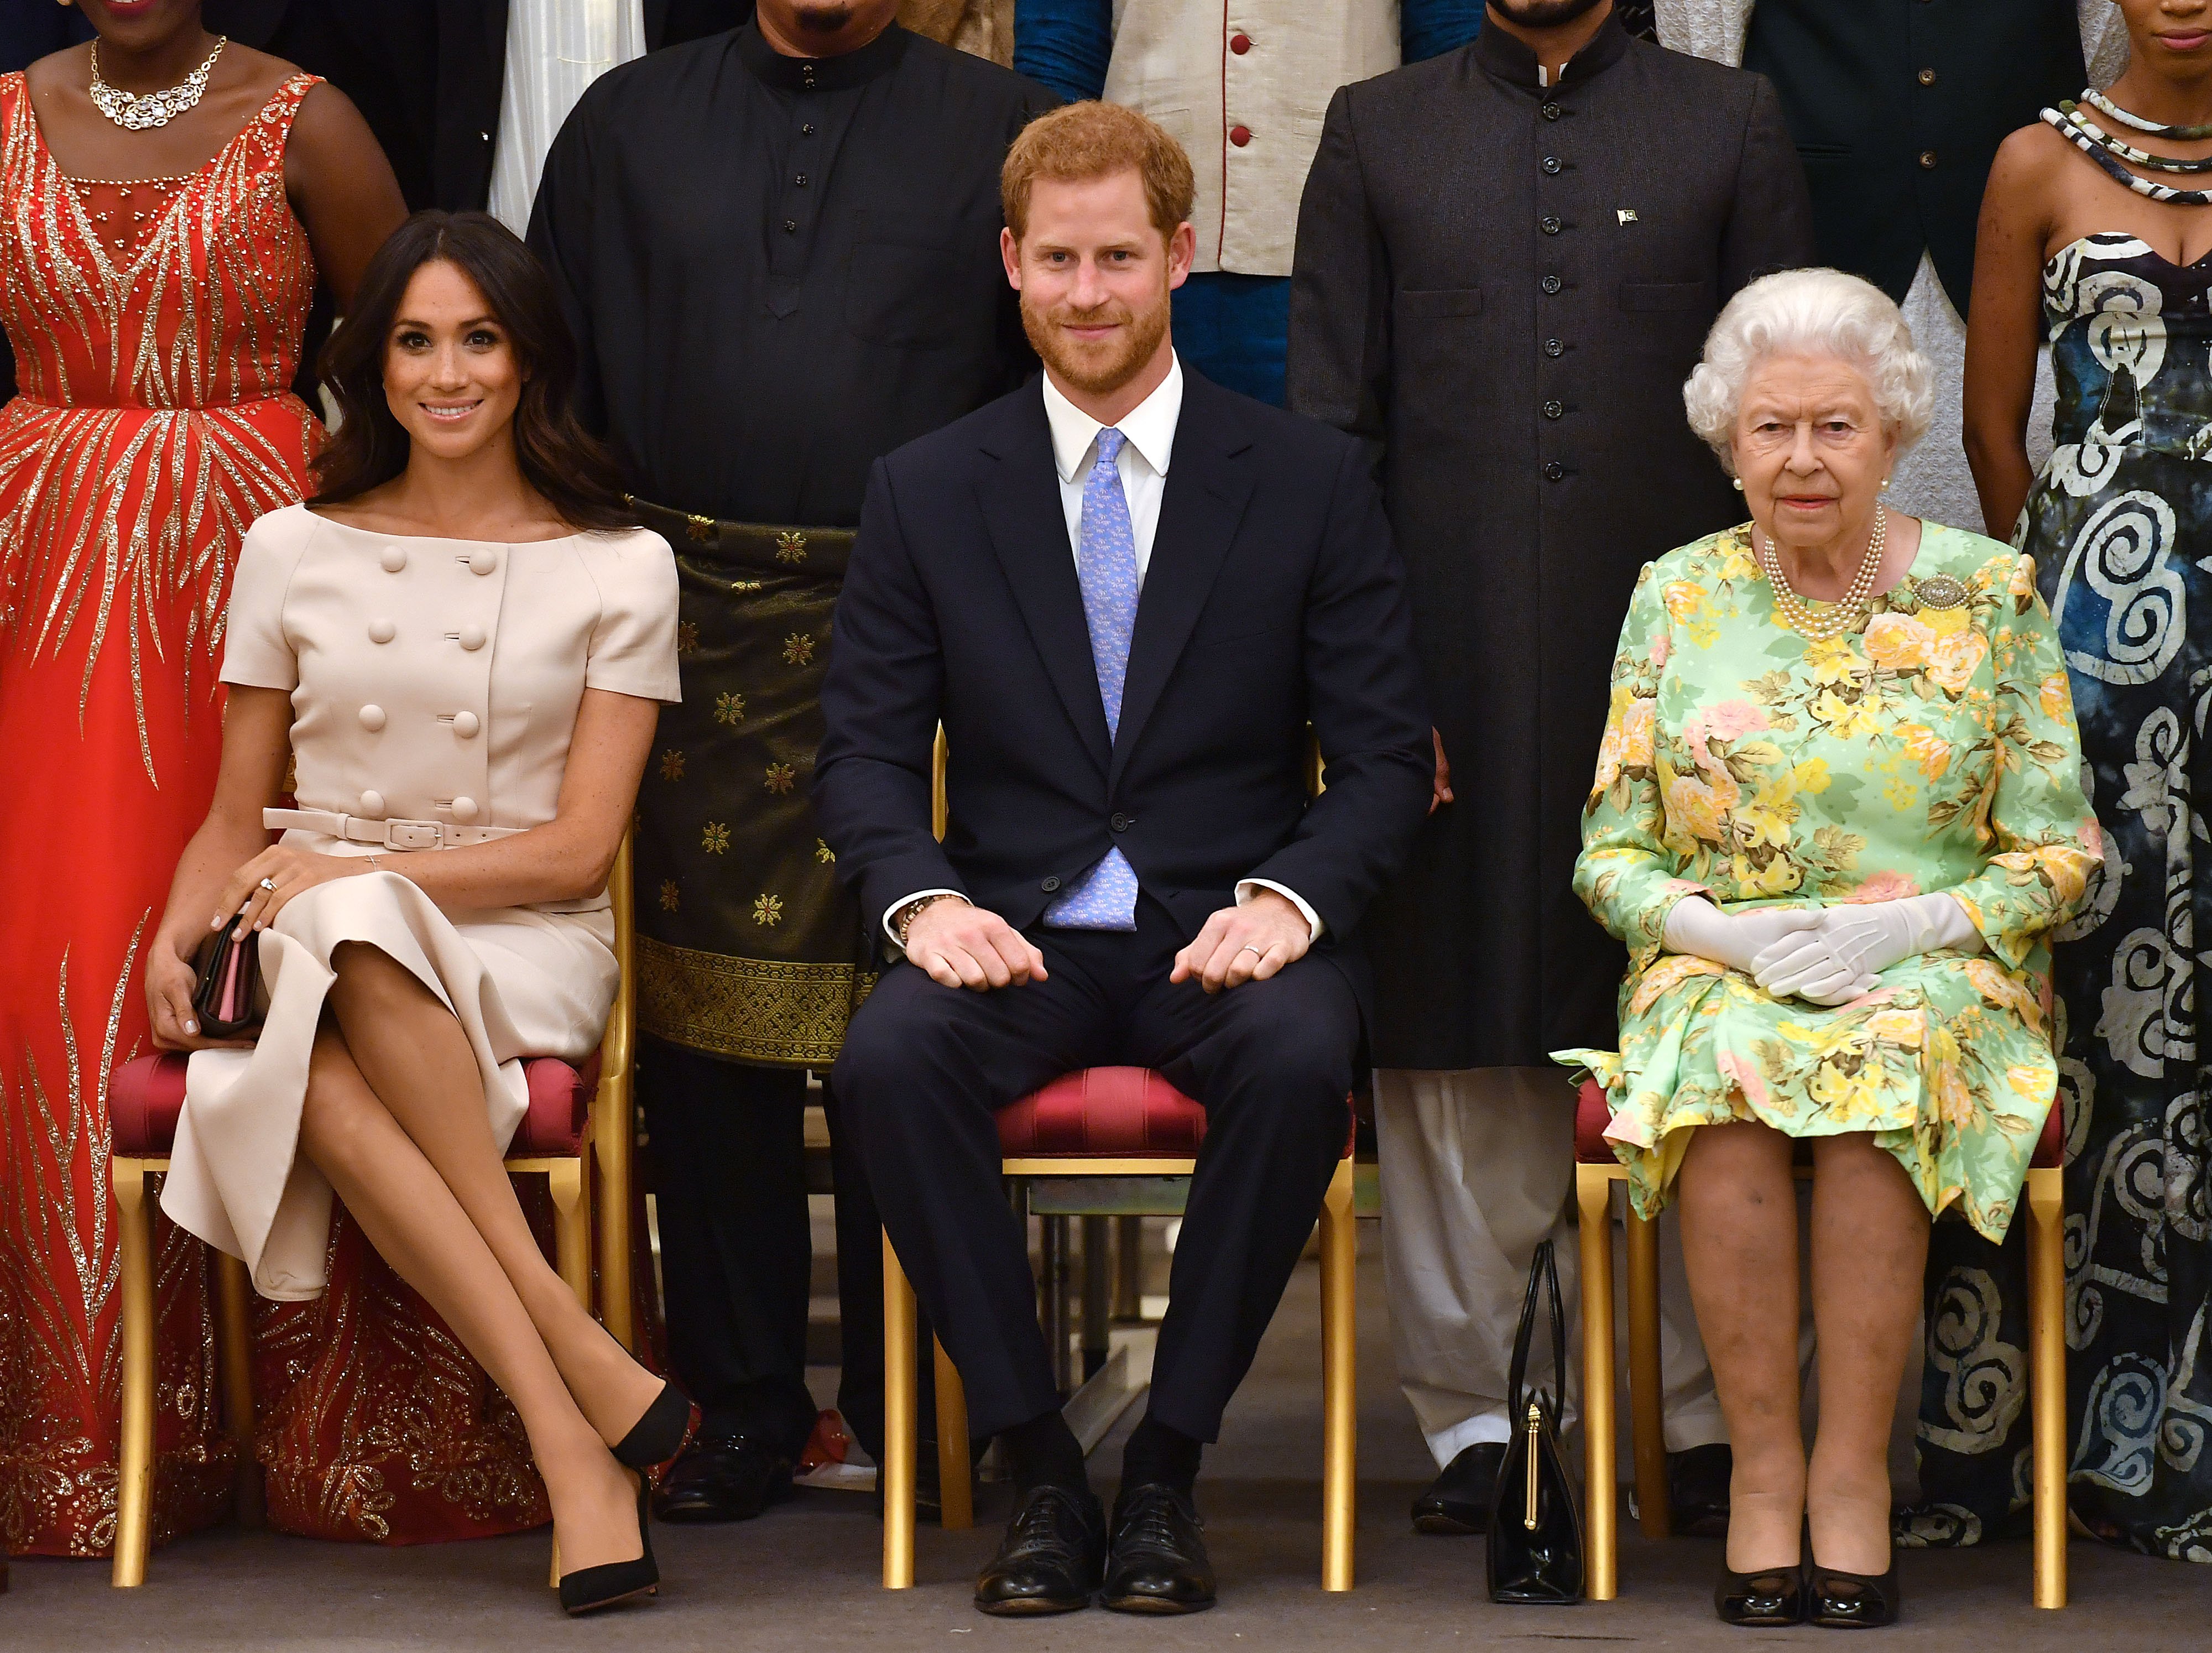 Prince Harry, Queen Elizabeth II and Meghan Markle in London 2018. | Source: Getty Images